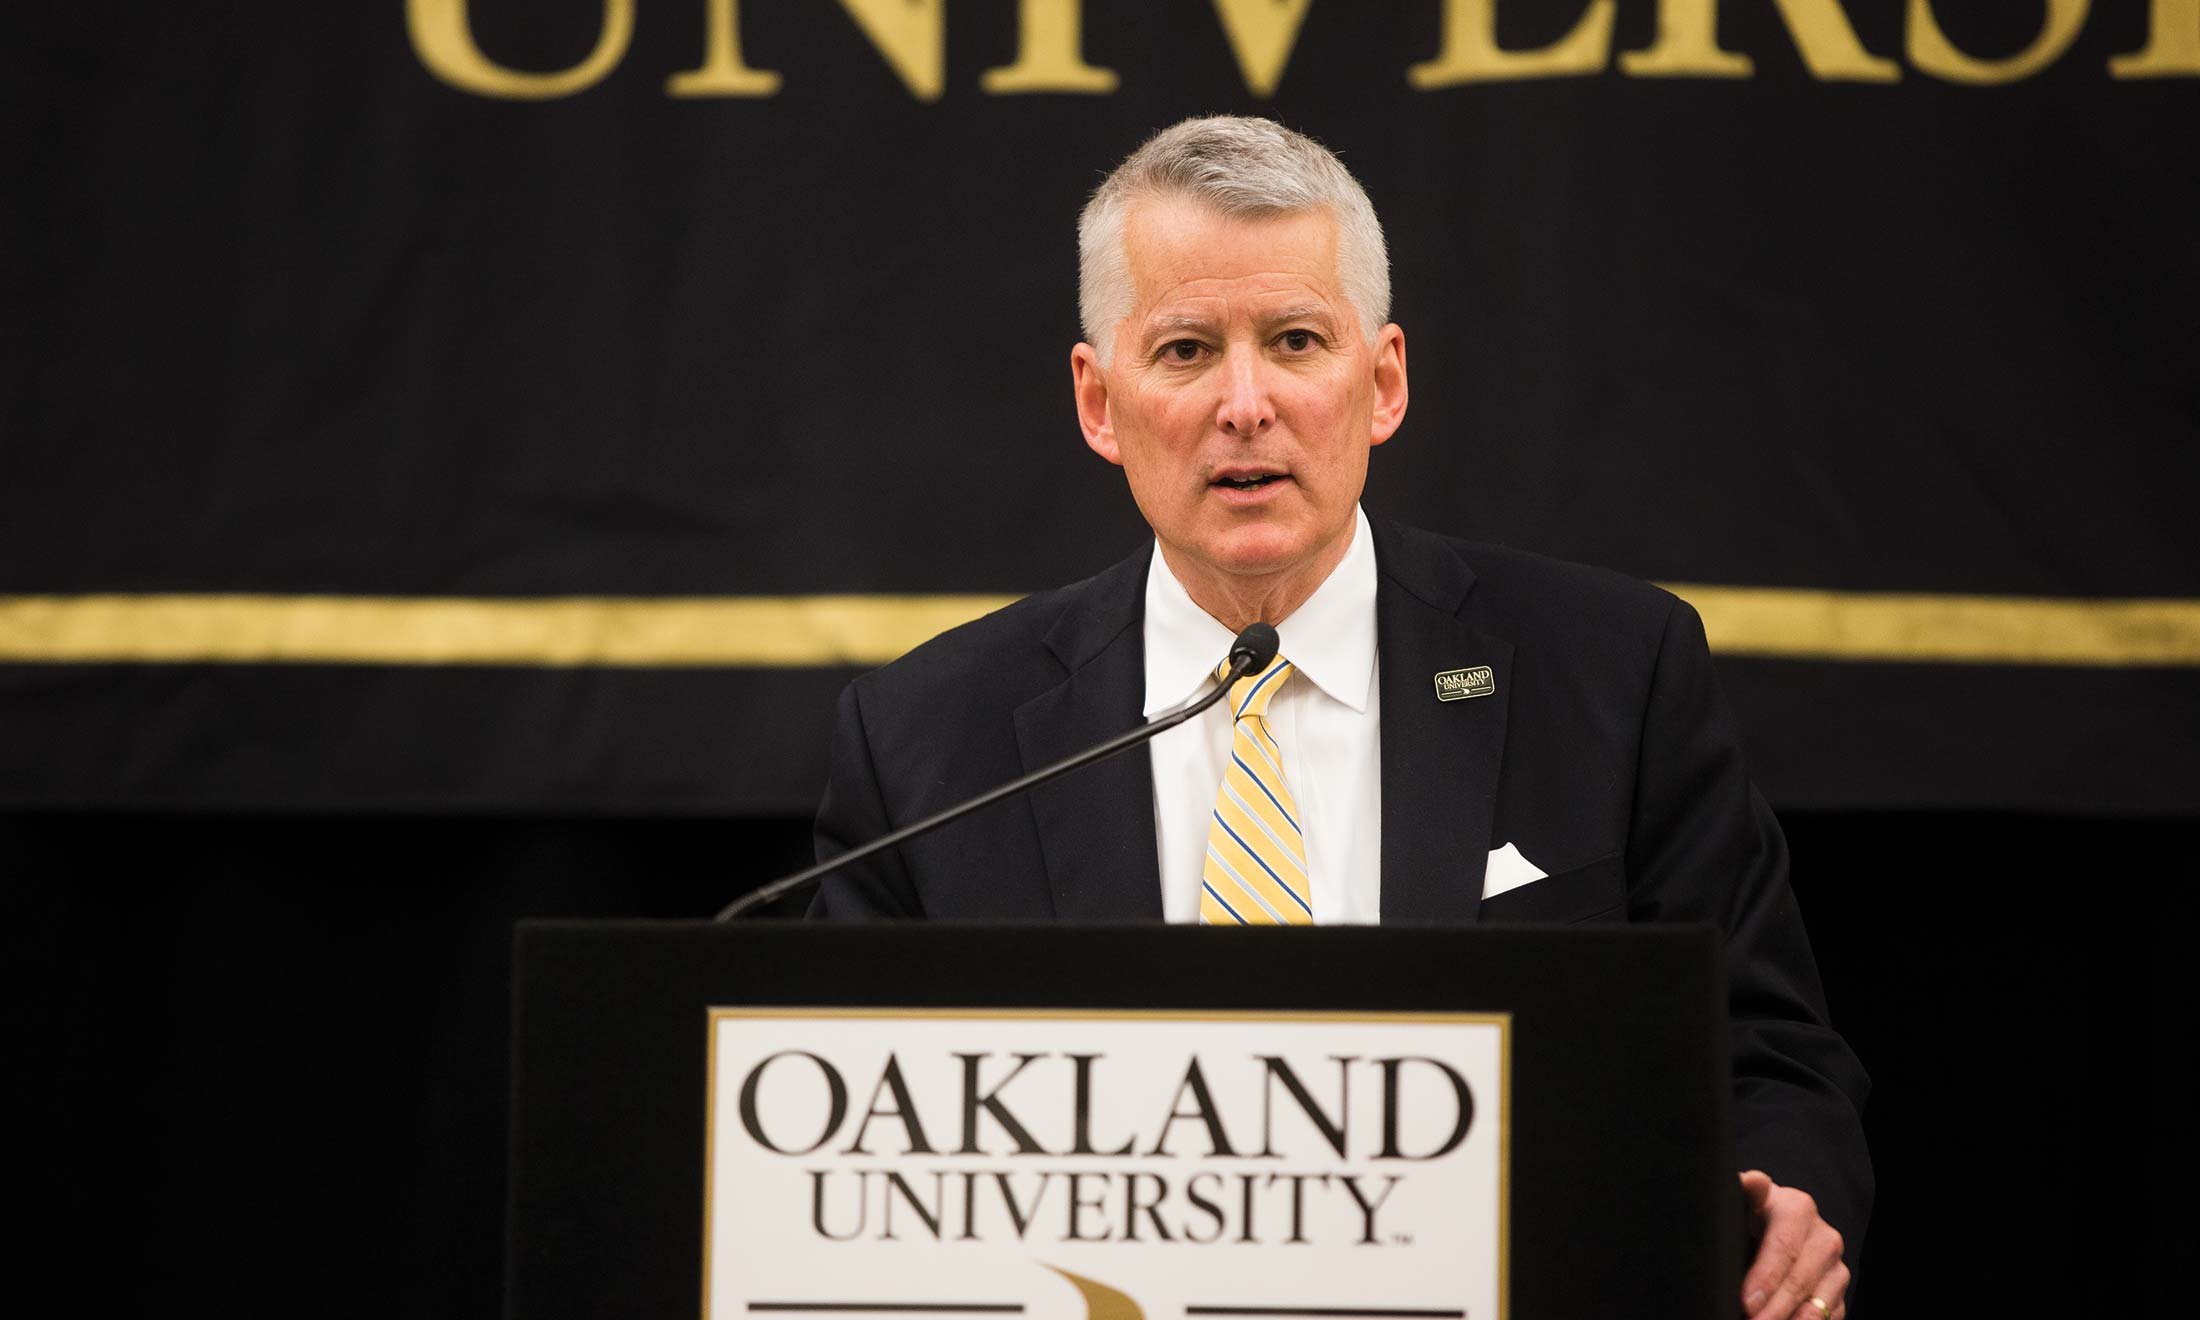 O U Board Chair Richard L. DeVore standing at podium announcing Dr. Ora Hirsch Pescovitz as the seventh president of Oakland University